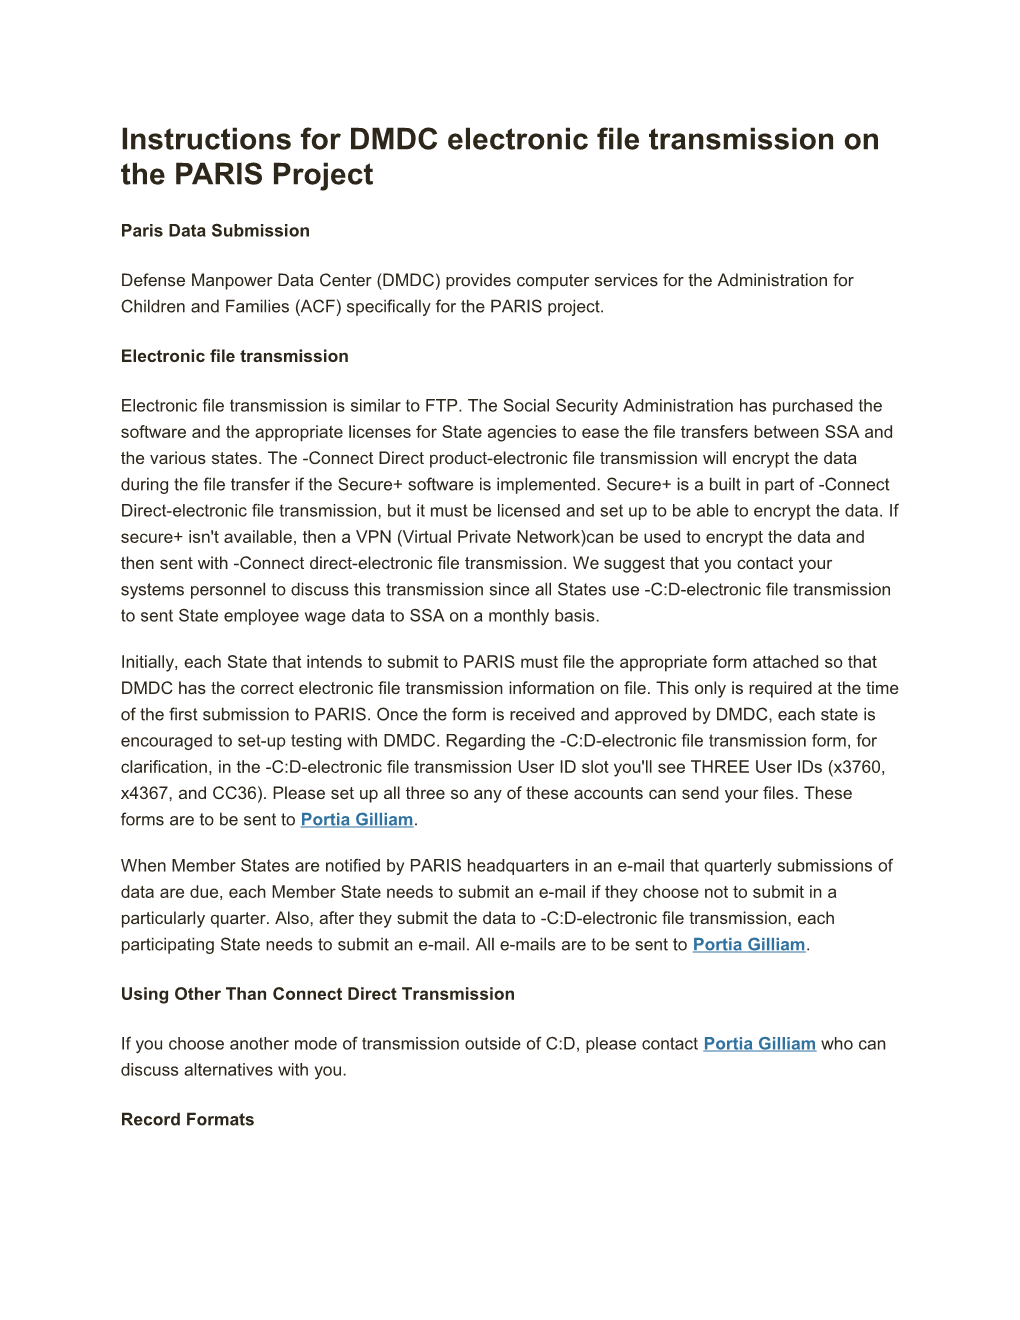 Instructions for DMDC Electronic File Transmission on the PARIS Project